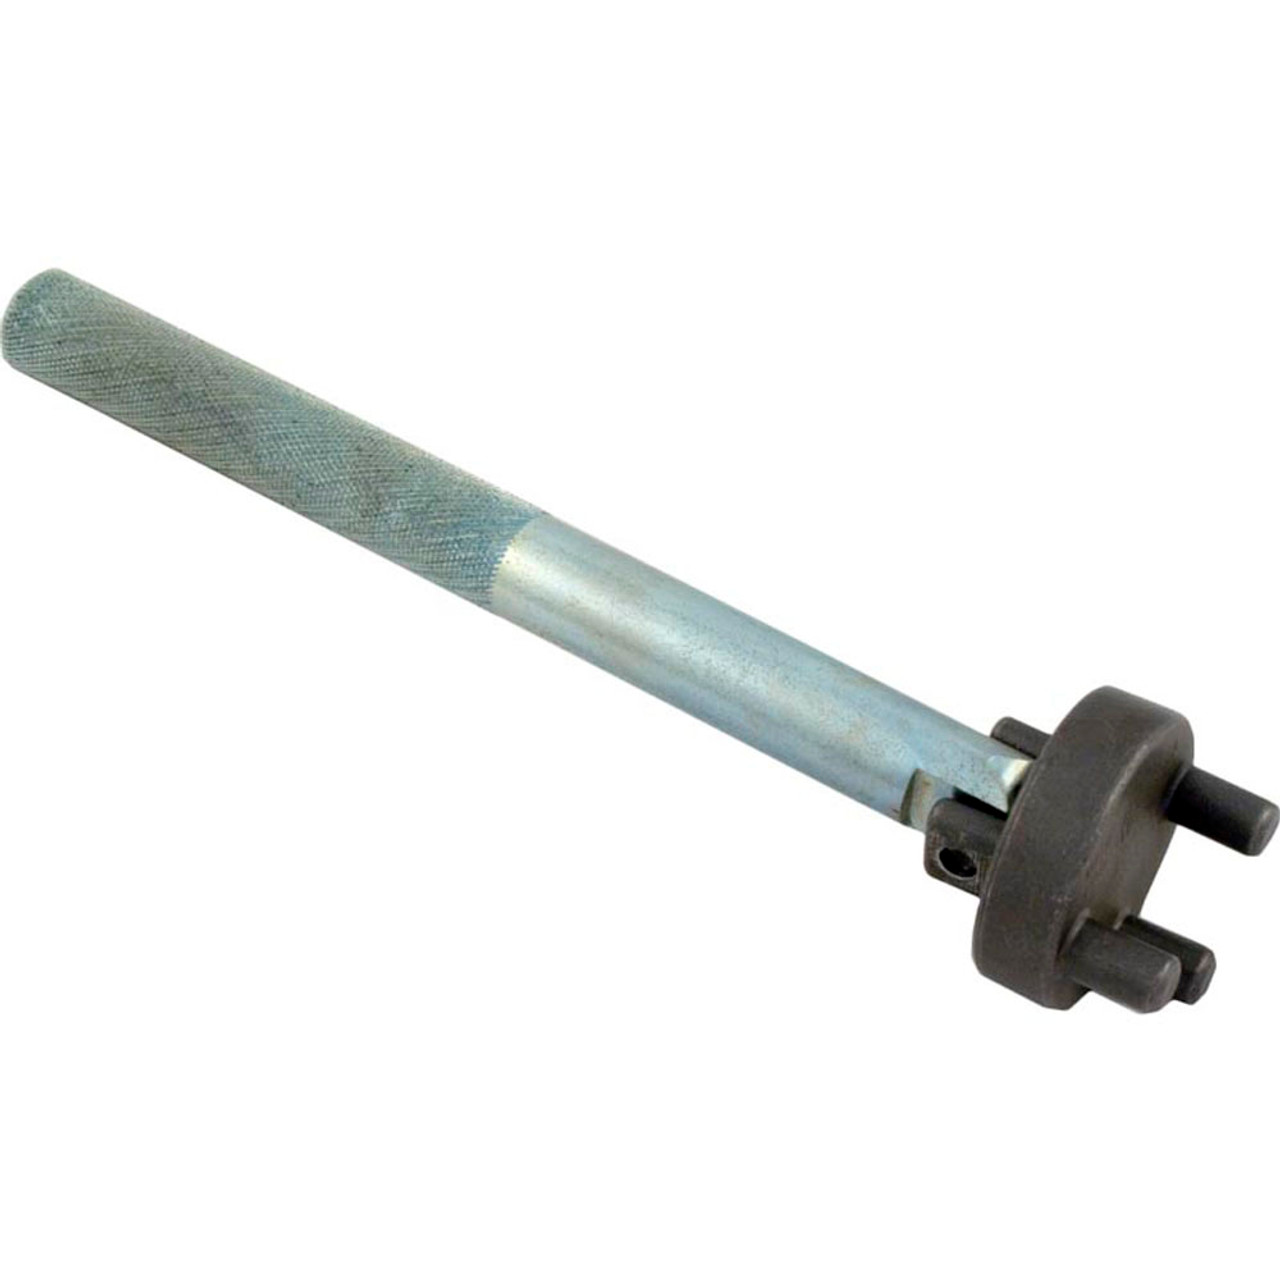 Pool Tool Closed Impeller Wrench # 127